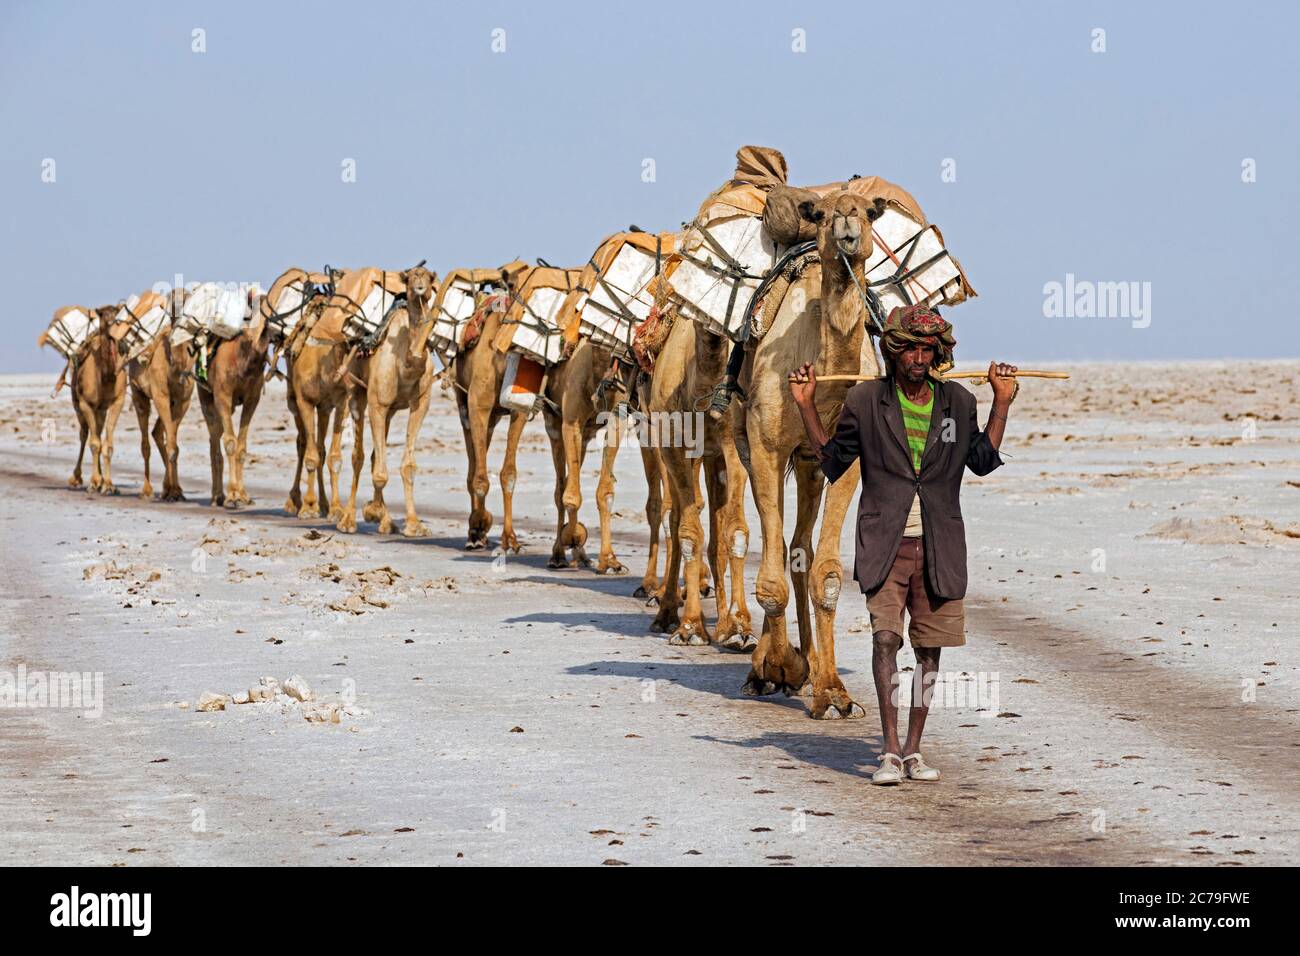 Cameleer of the Afar / Danakil tribe leading camel train / salt caravan with camels through Danakil Desert, hottest place on Earth, Ethiopia, Africa Stock Photo